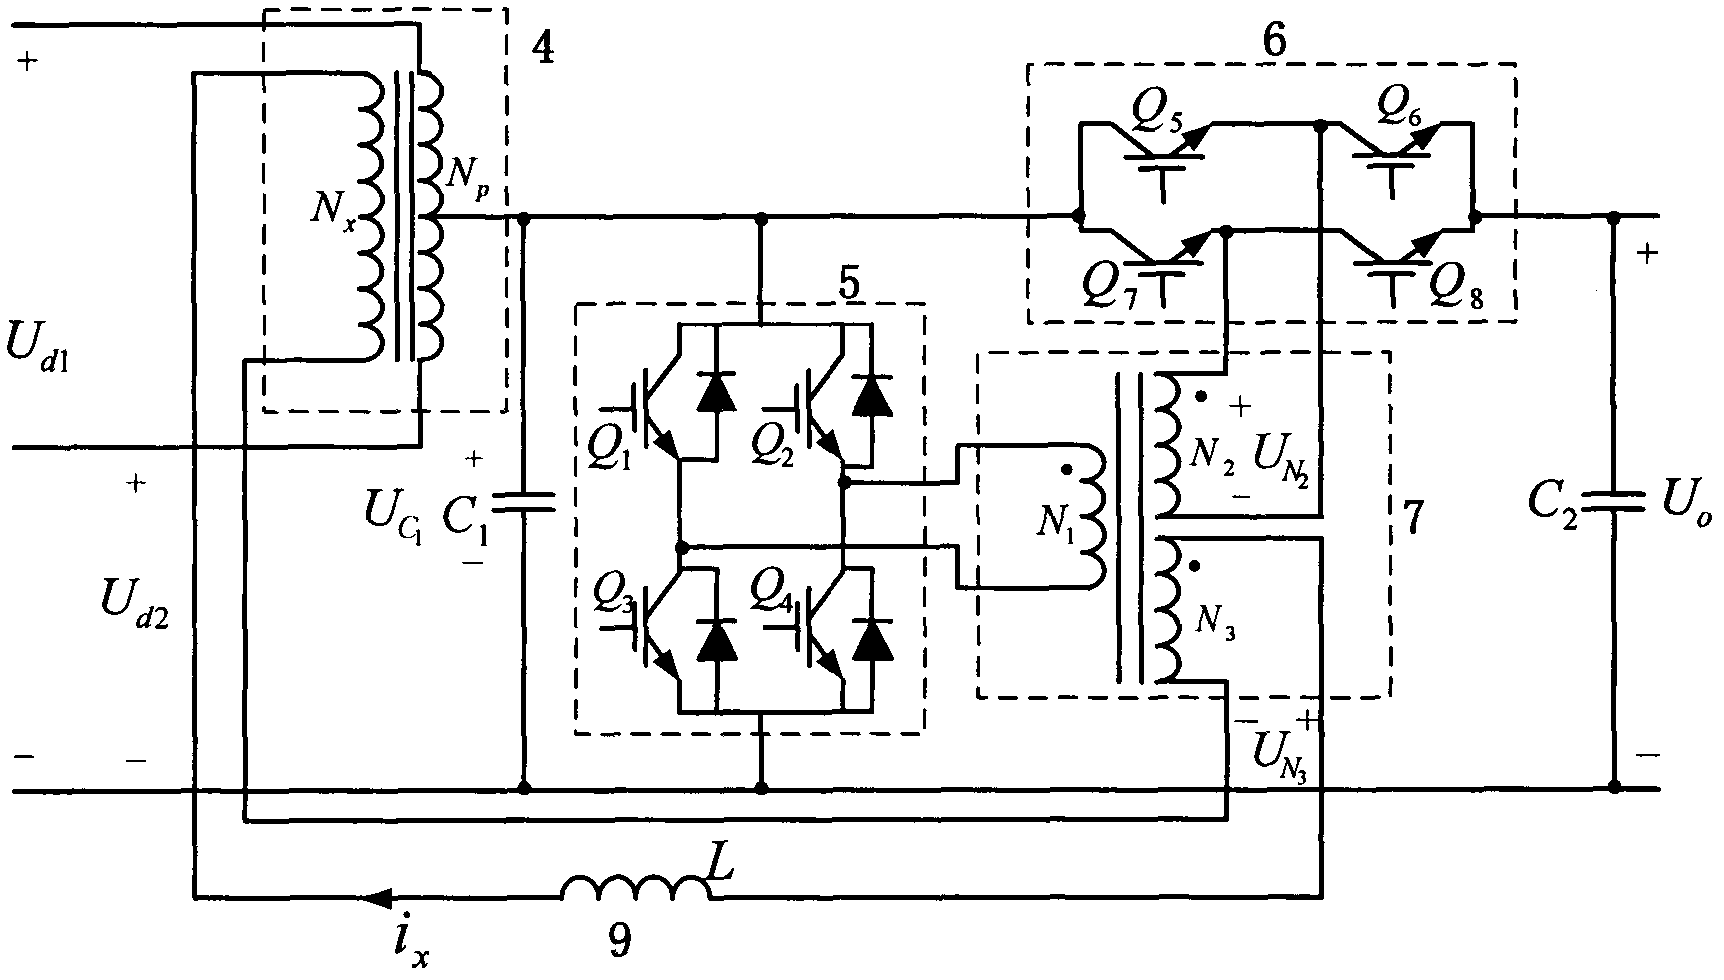 Voltage transforming rectifier with dual functions of voltage stabilization and harmonic injection